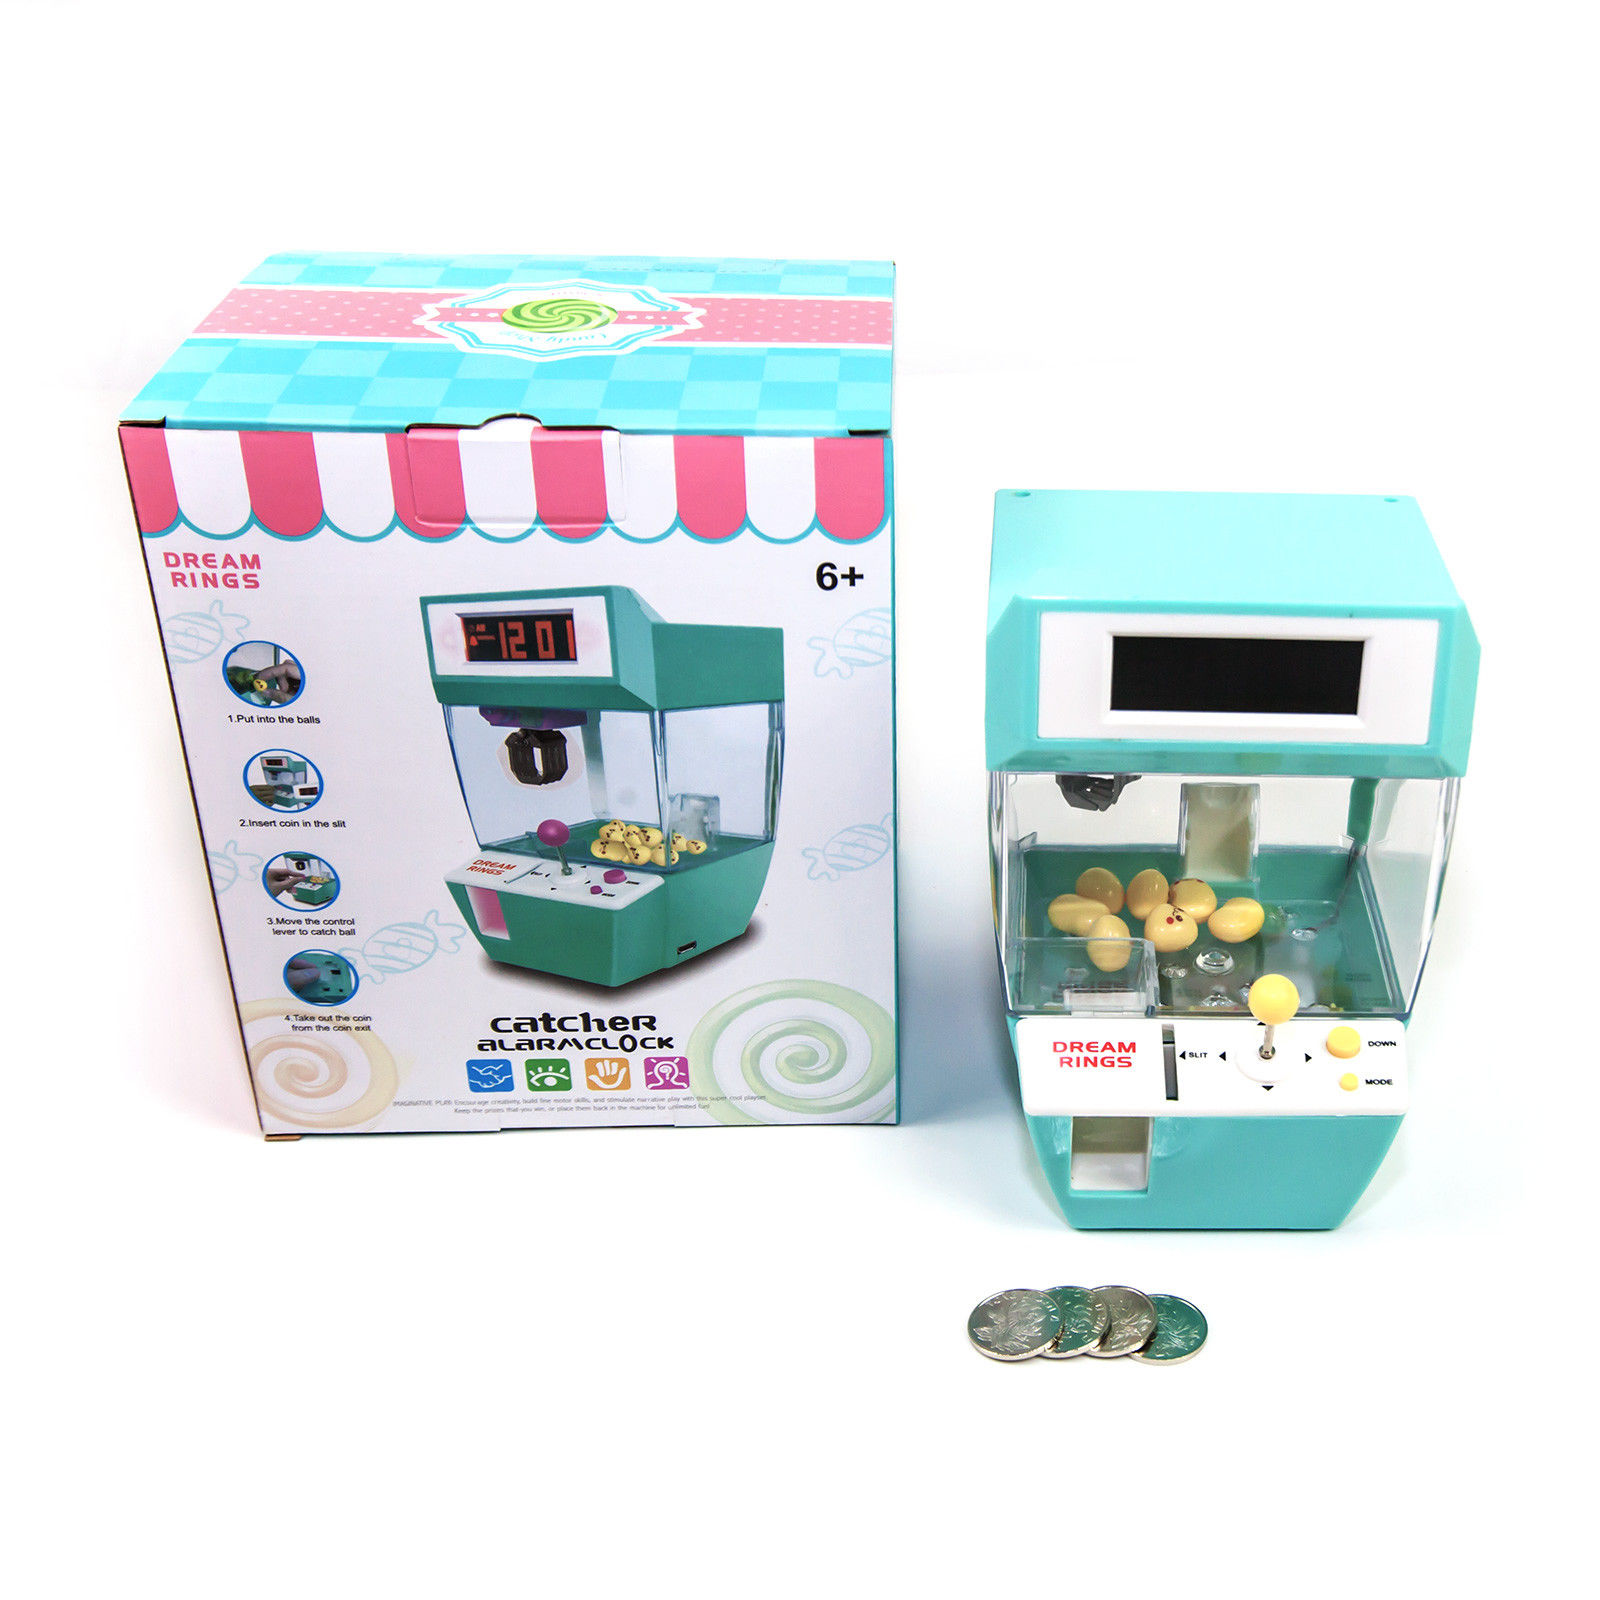 4 Toy Coins 16 Balls Rose red Pokerty Mini Claw Machine 2 in 1 Toy Claw Machine LCD Alarm Clock Mini Candies Toys Prize Dispenser Game with Sound